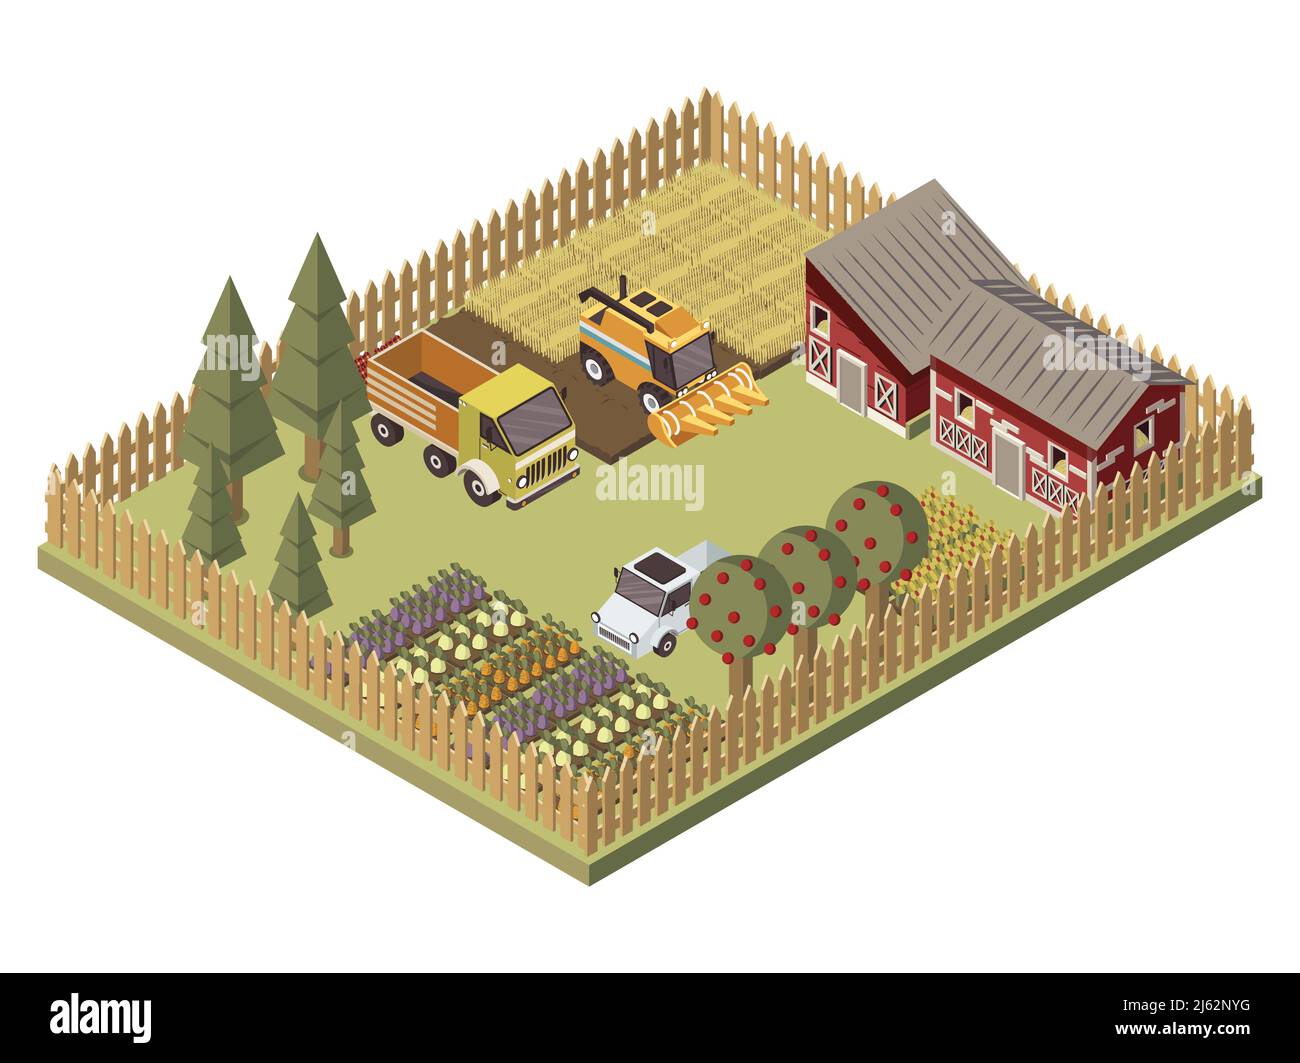 Farm vehicles isometric design with agricultural buildings cultivated lands apple trees garden beds with harvest vector illustration Stock Vector